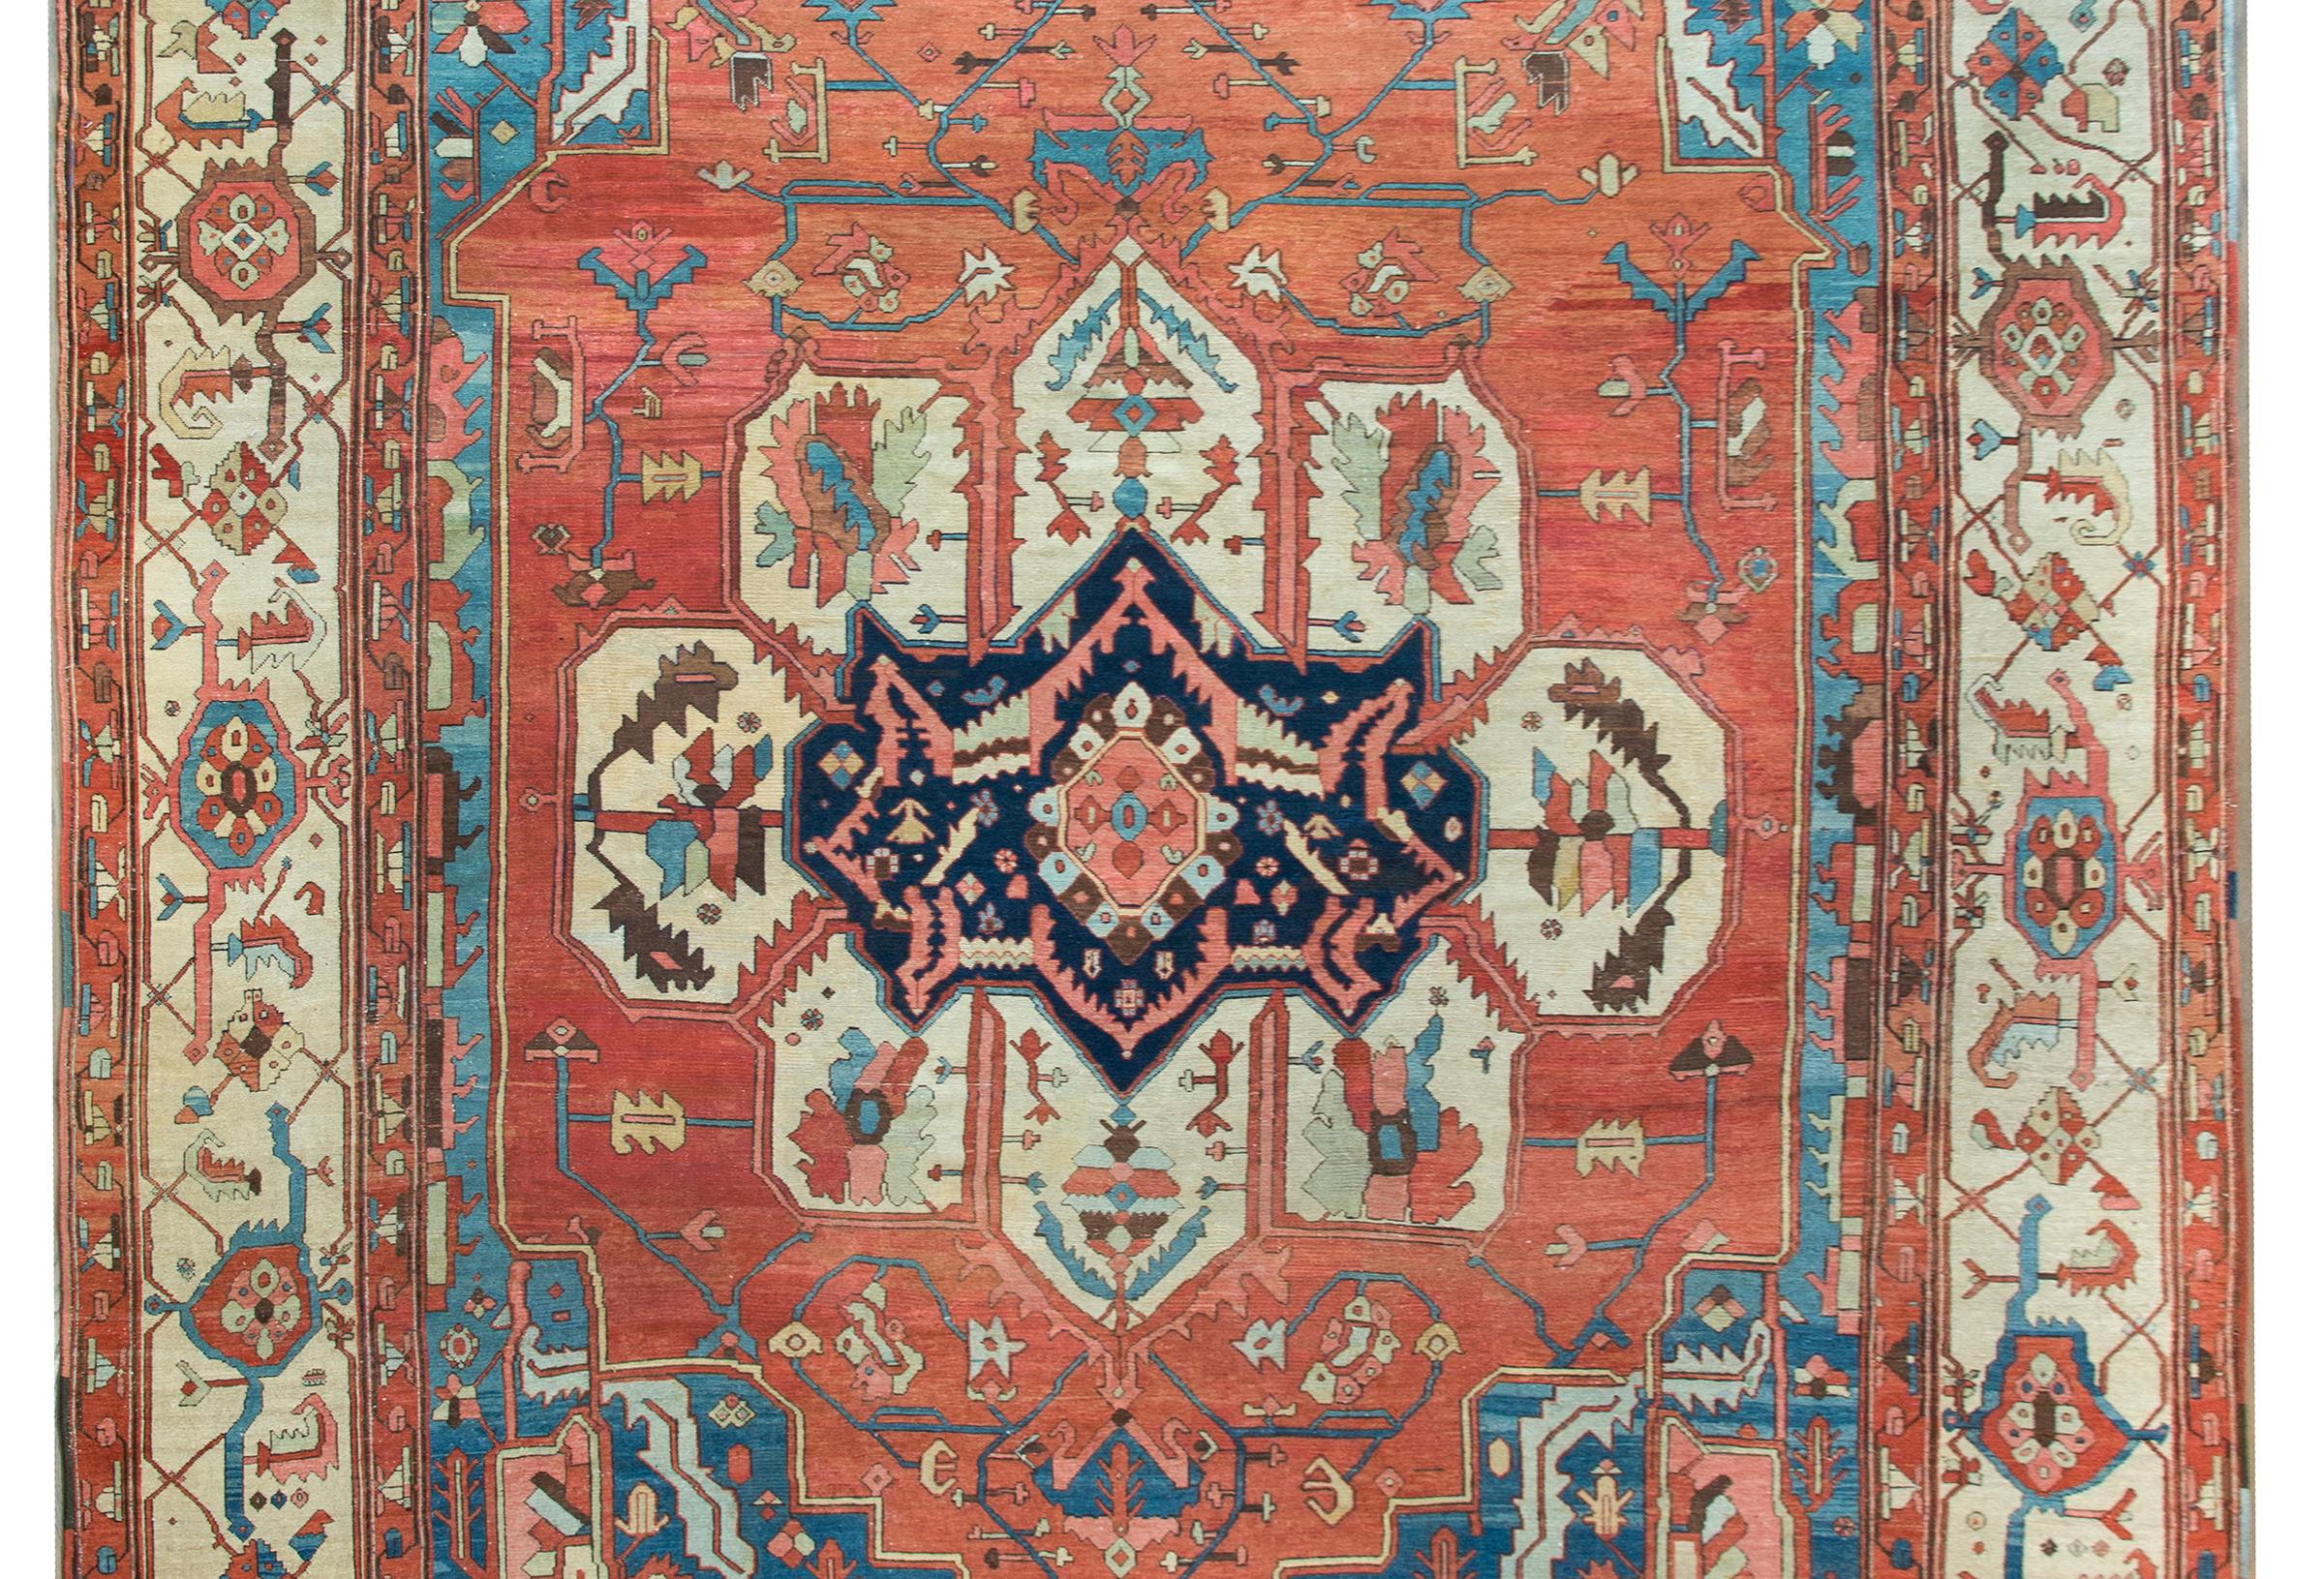 A stunning and one-of-a-kind late 19th century Persian Bakshaish rug with most wonderful asymmetrical central floral medallion woven with myriad stylized large-scale flowers, leaves, and scrolling vines woven in light and dark indigo, pink, crimson,